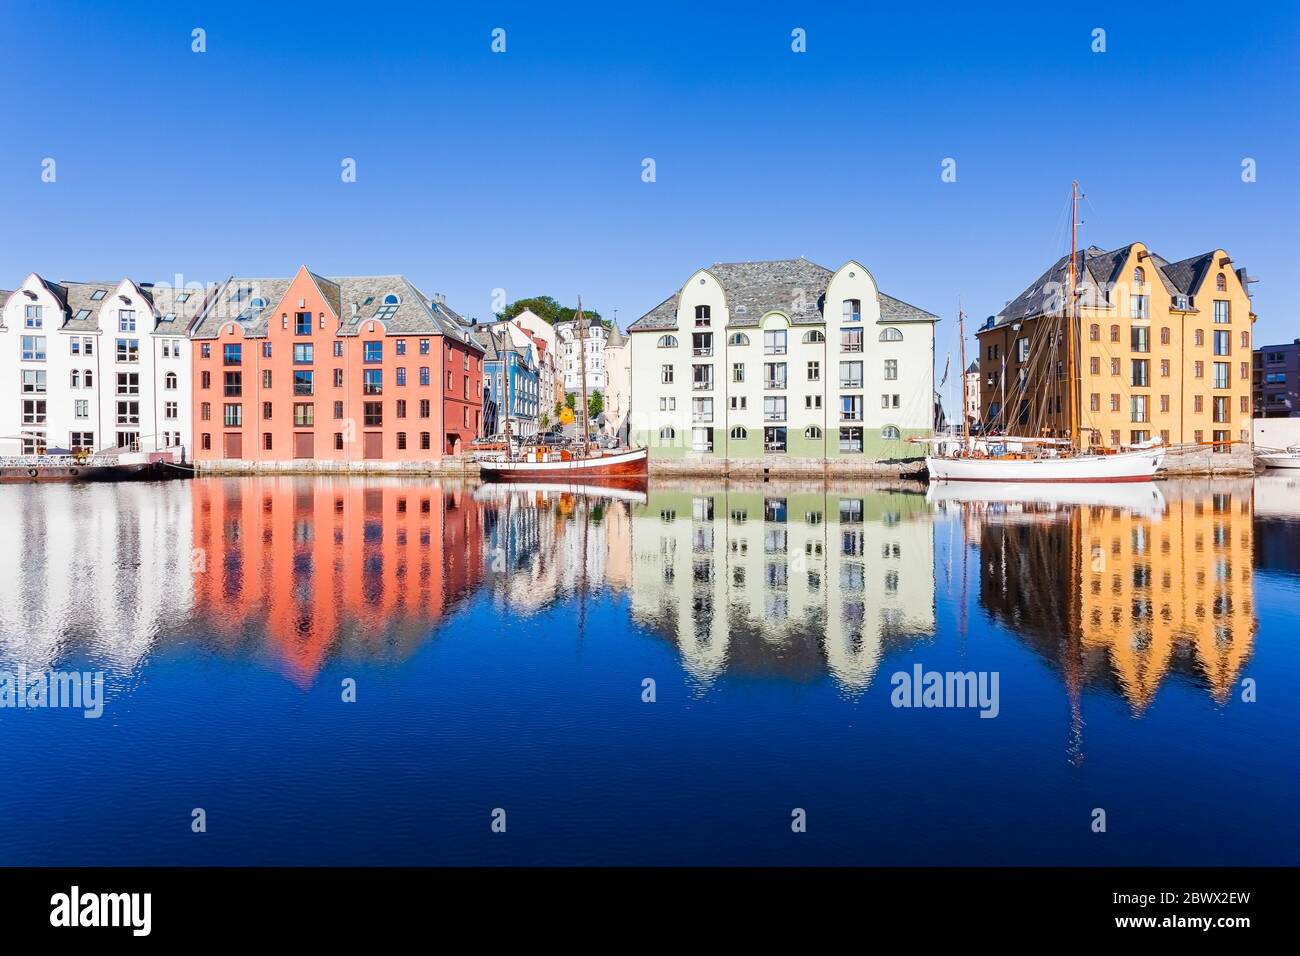 Alesund, Norway. Known for the art nouveau architectural style. Stock Photo